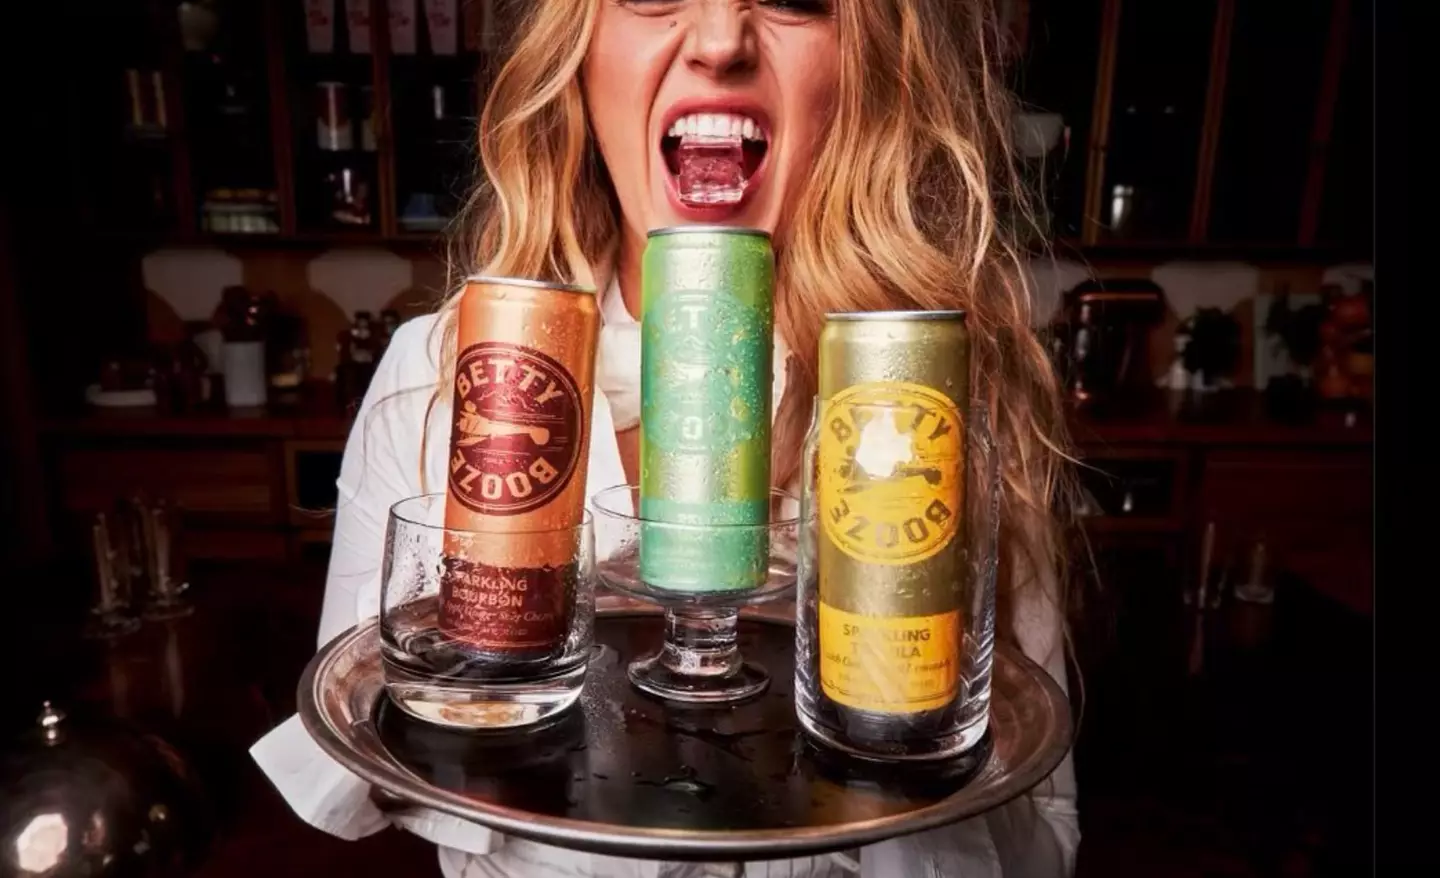 She has faced backlash for launching the line, as she is not a drinker herself.